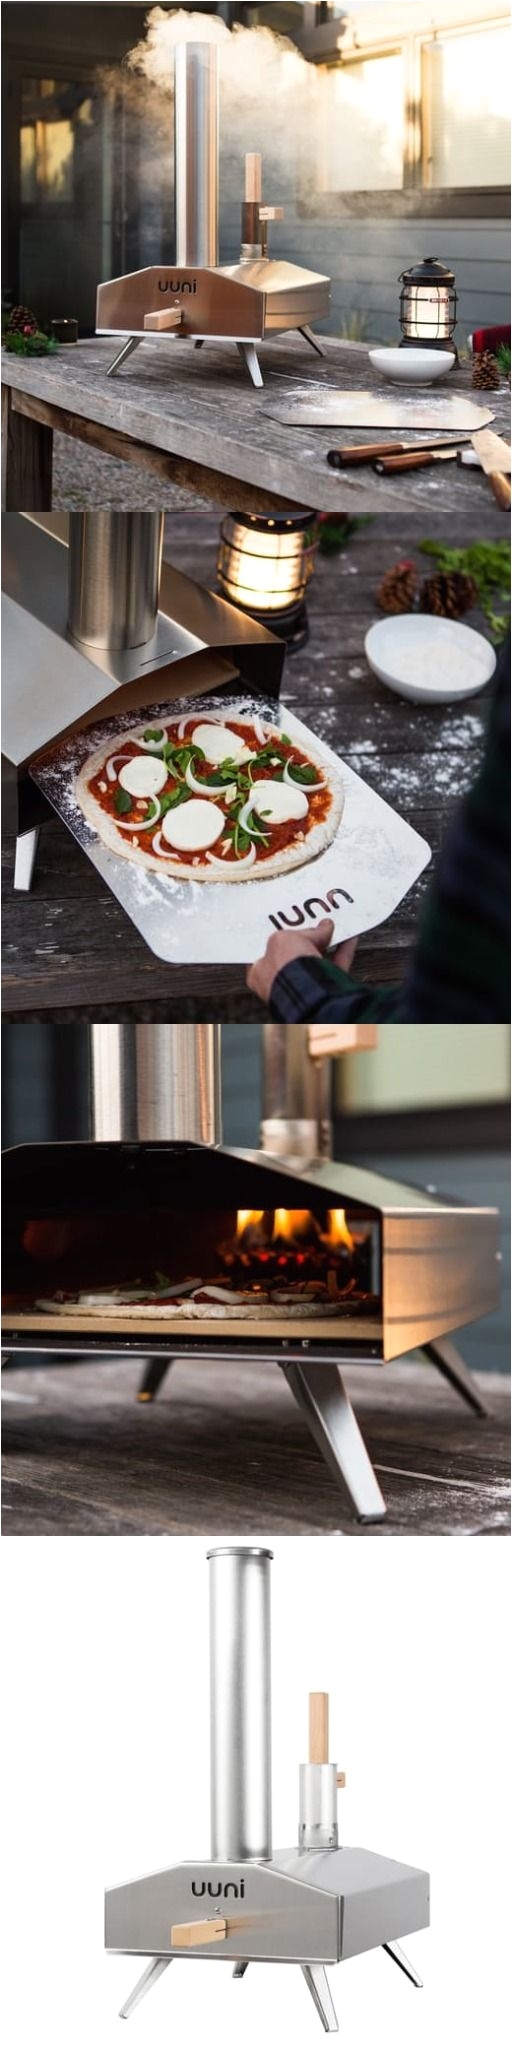 uuni 2s wood fired oven with stone baking board